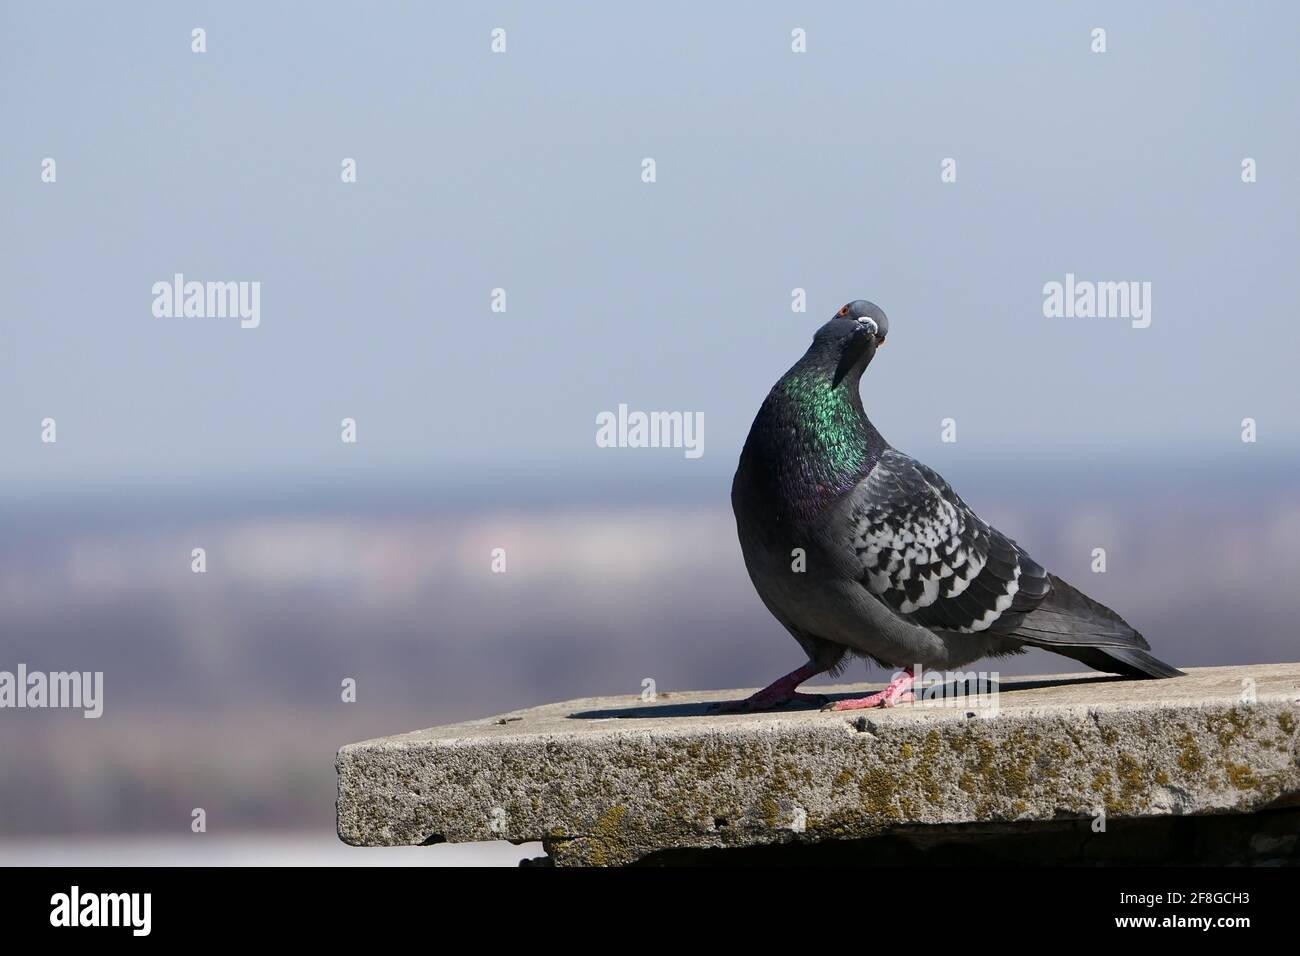 A beautiful pigeon in its natural habitat. Nature and birds Stock ...